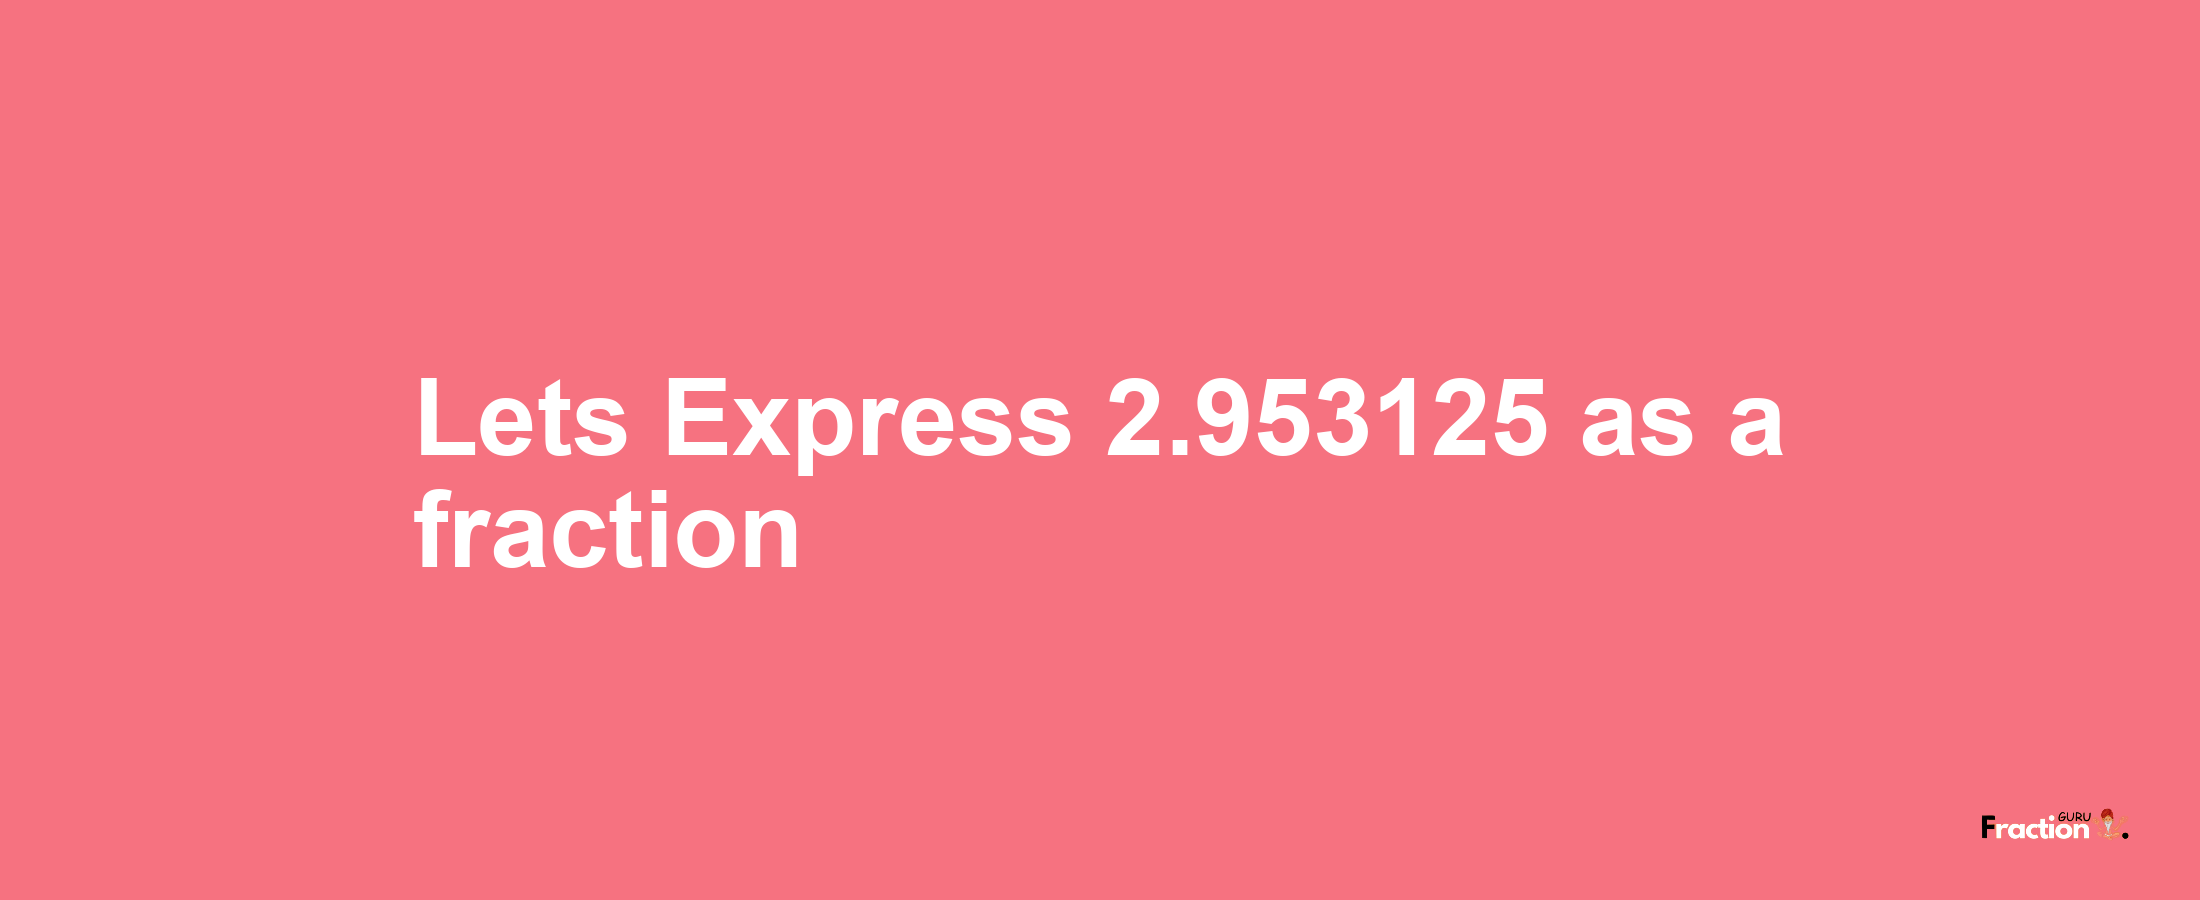 Lets Express 2.953125 as afraction